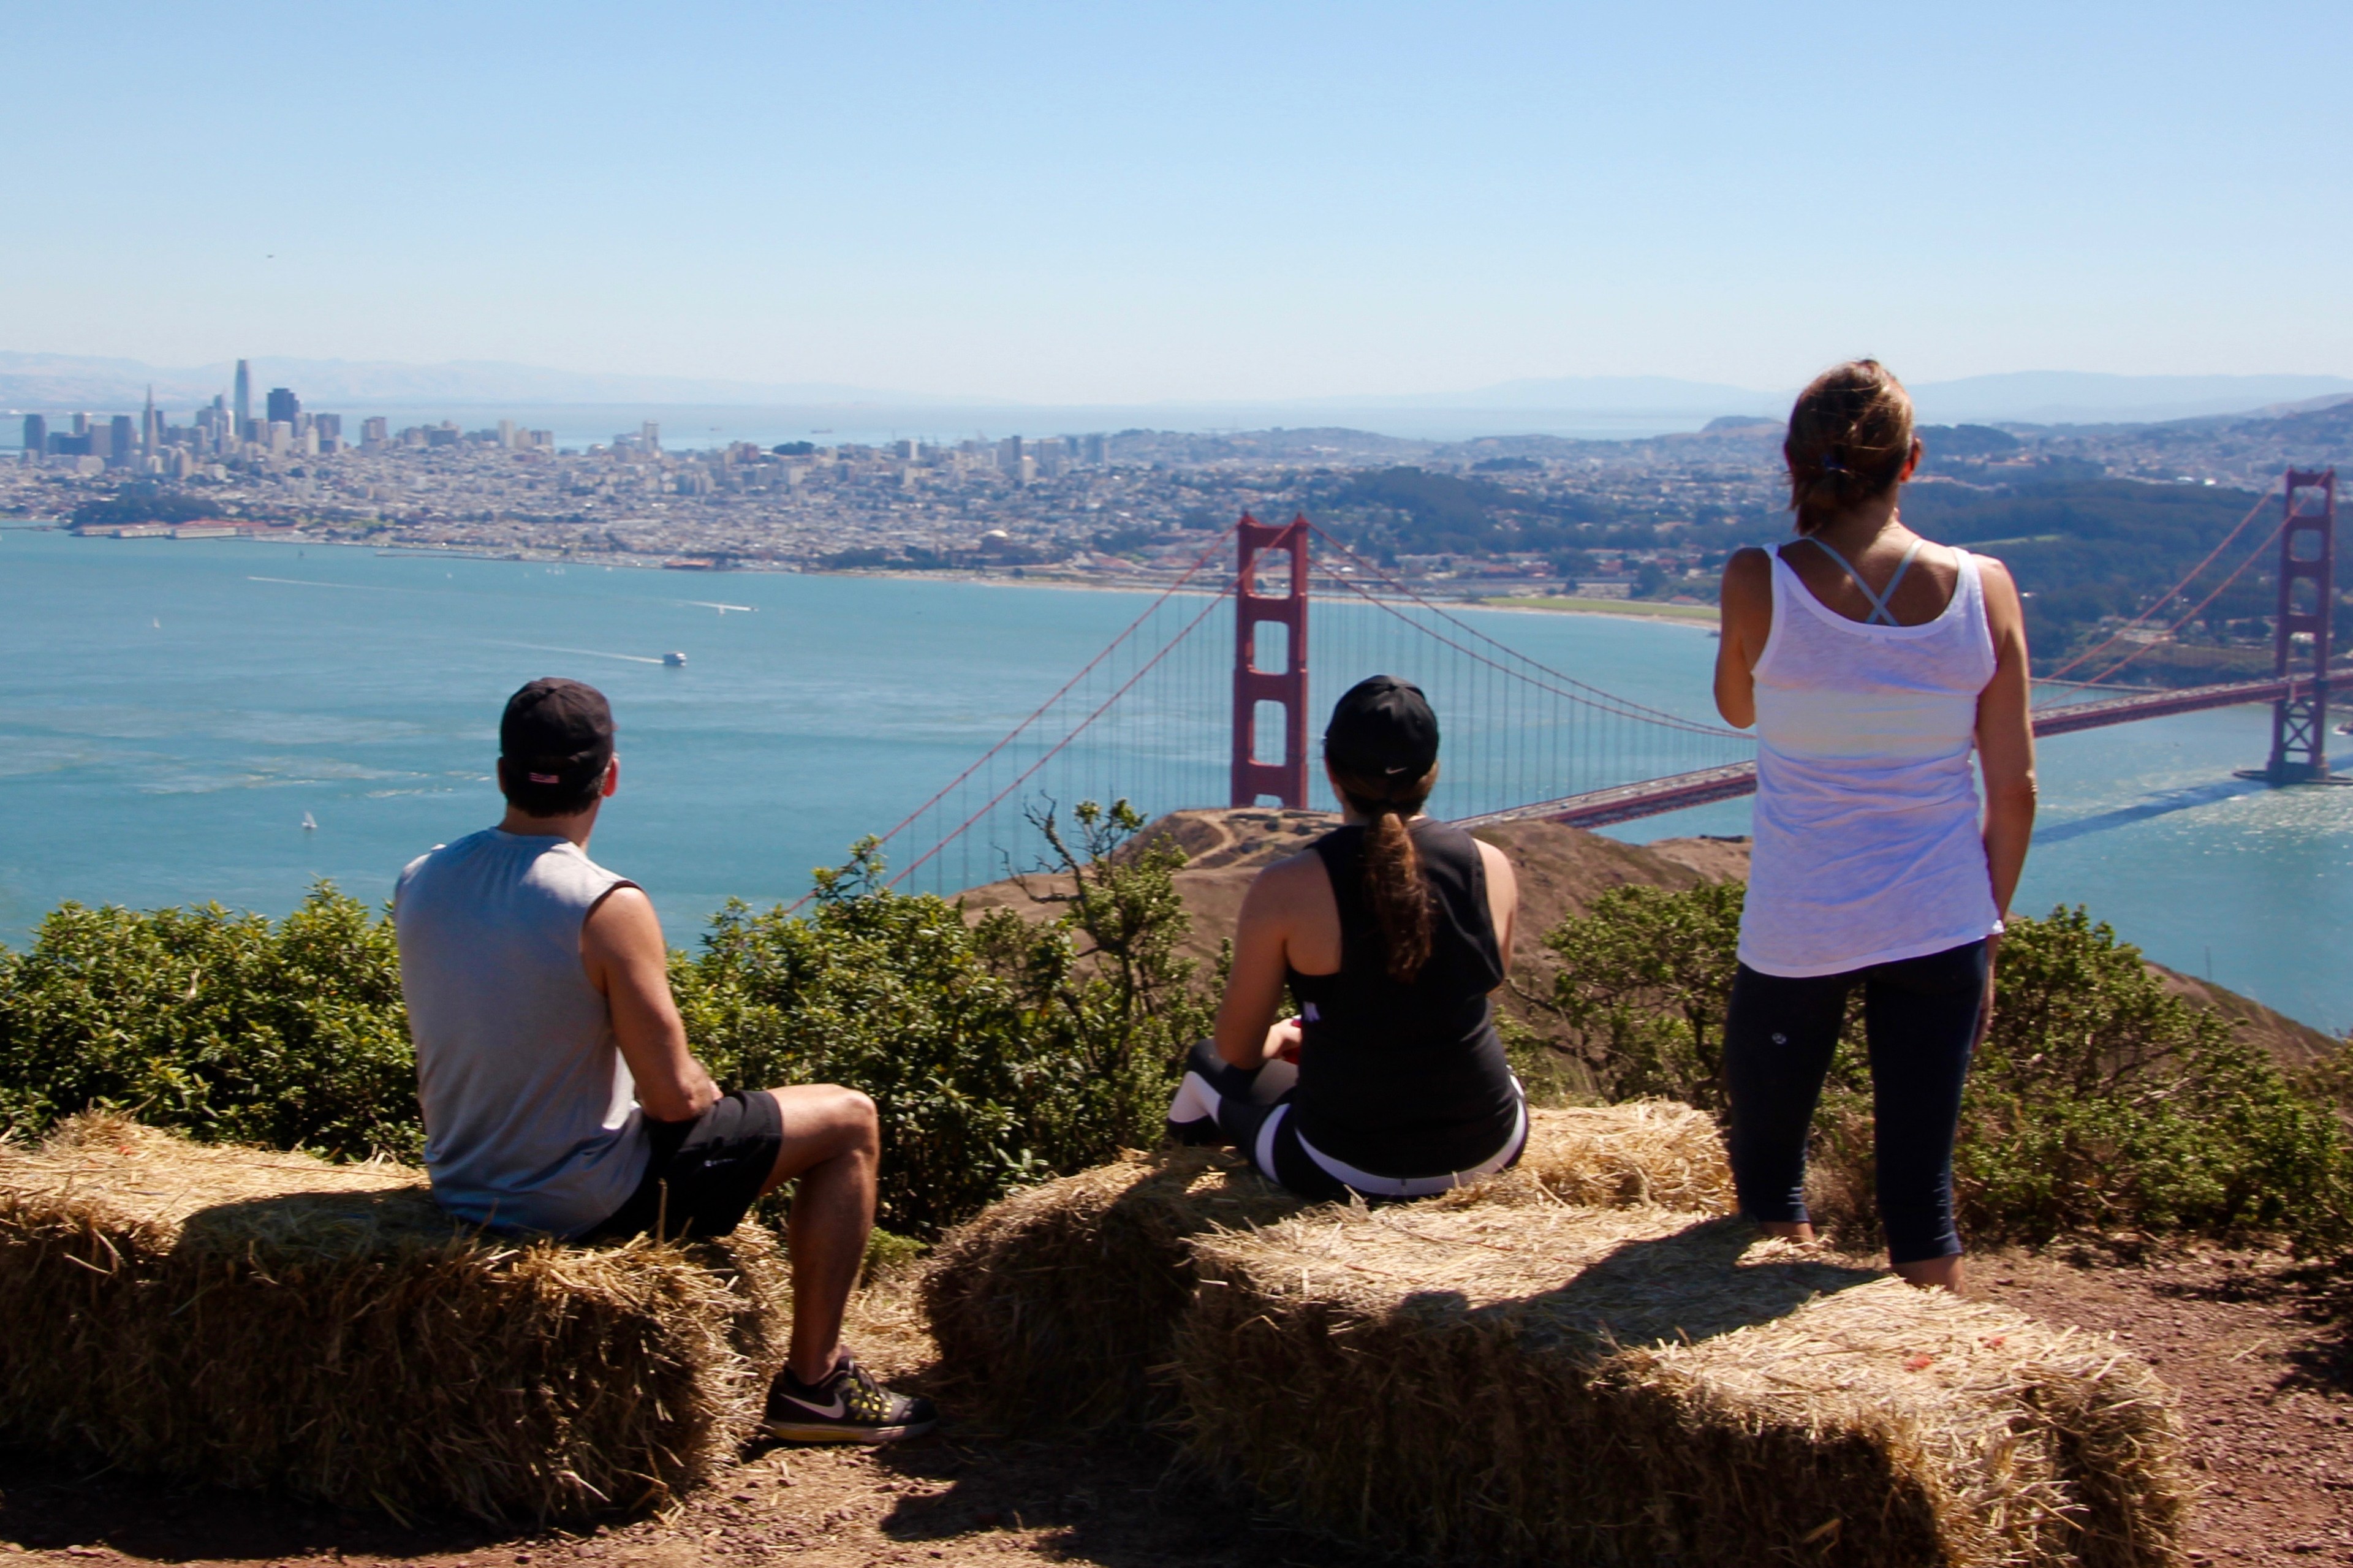 Three people looking at the Golden Gate Bridge and San Francisco skyline from a hill with hay bales.